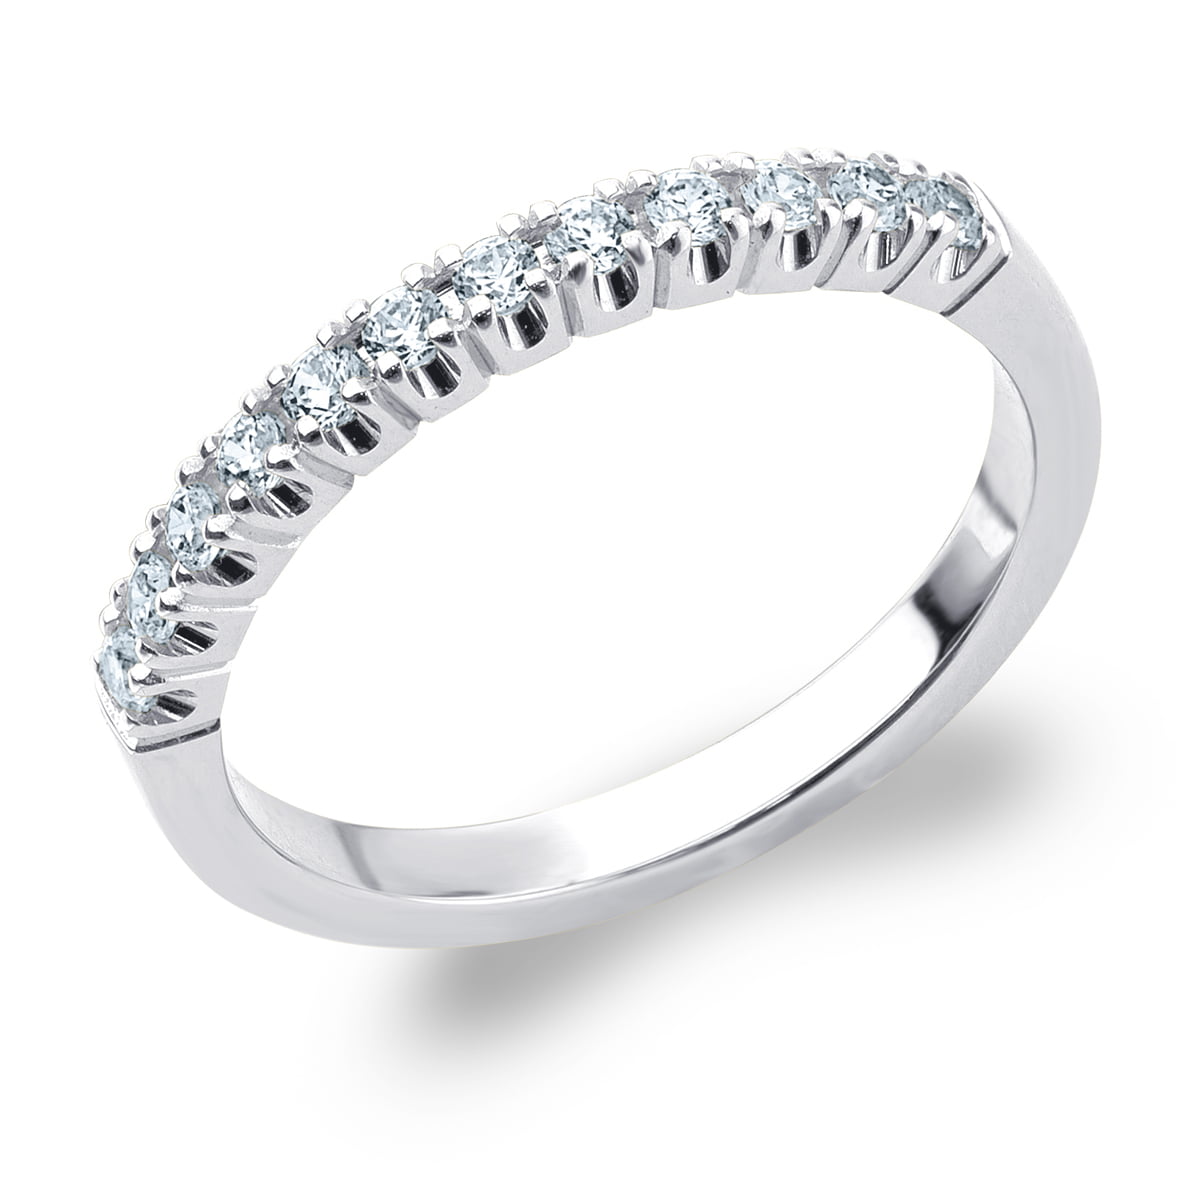 Details about    4 Ct Round Brilliant Cut Diamond Full Eternity Band Ring 14K White Gold Finish.